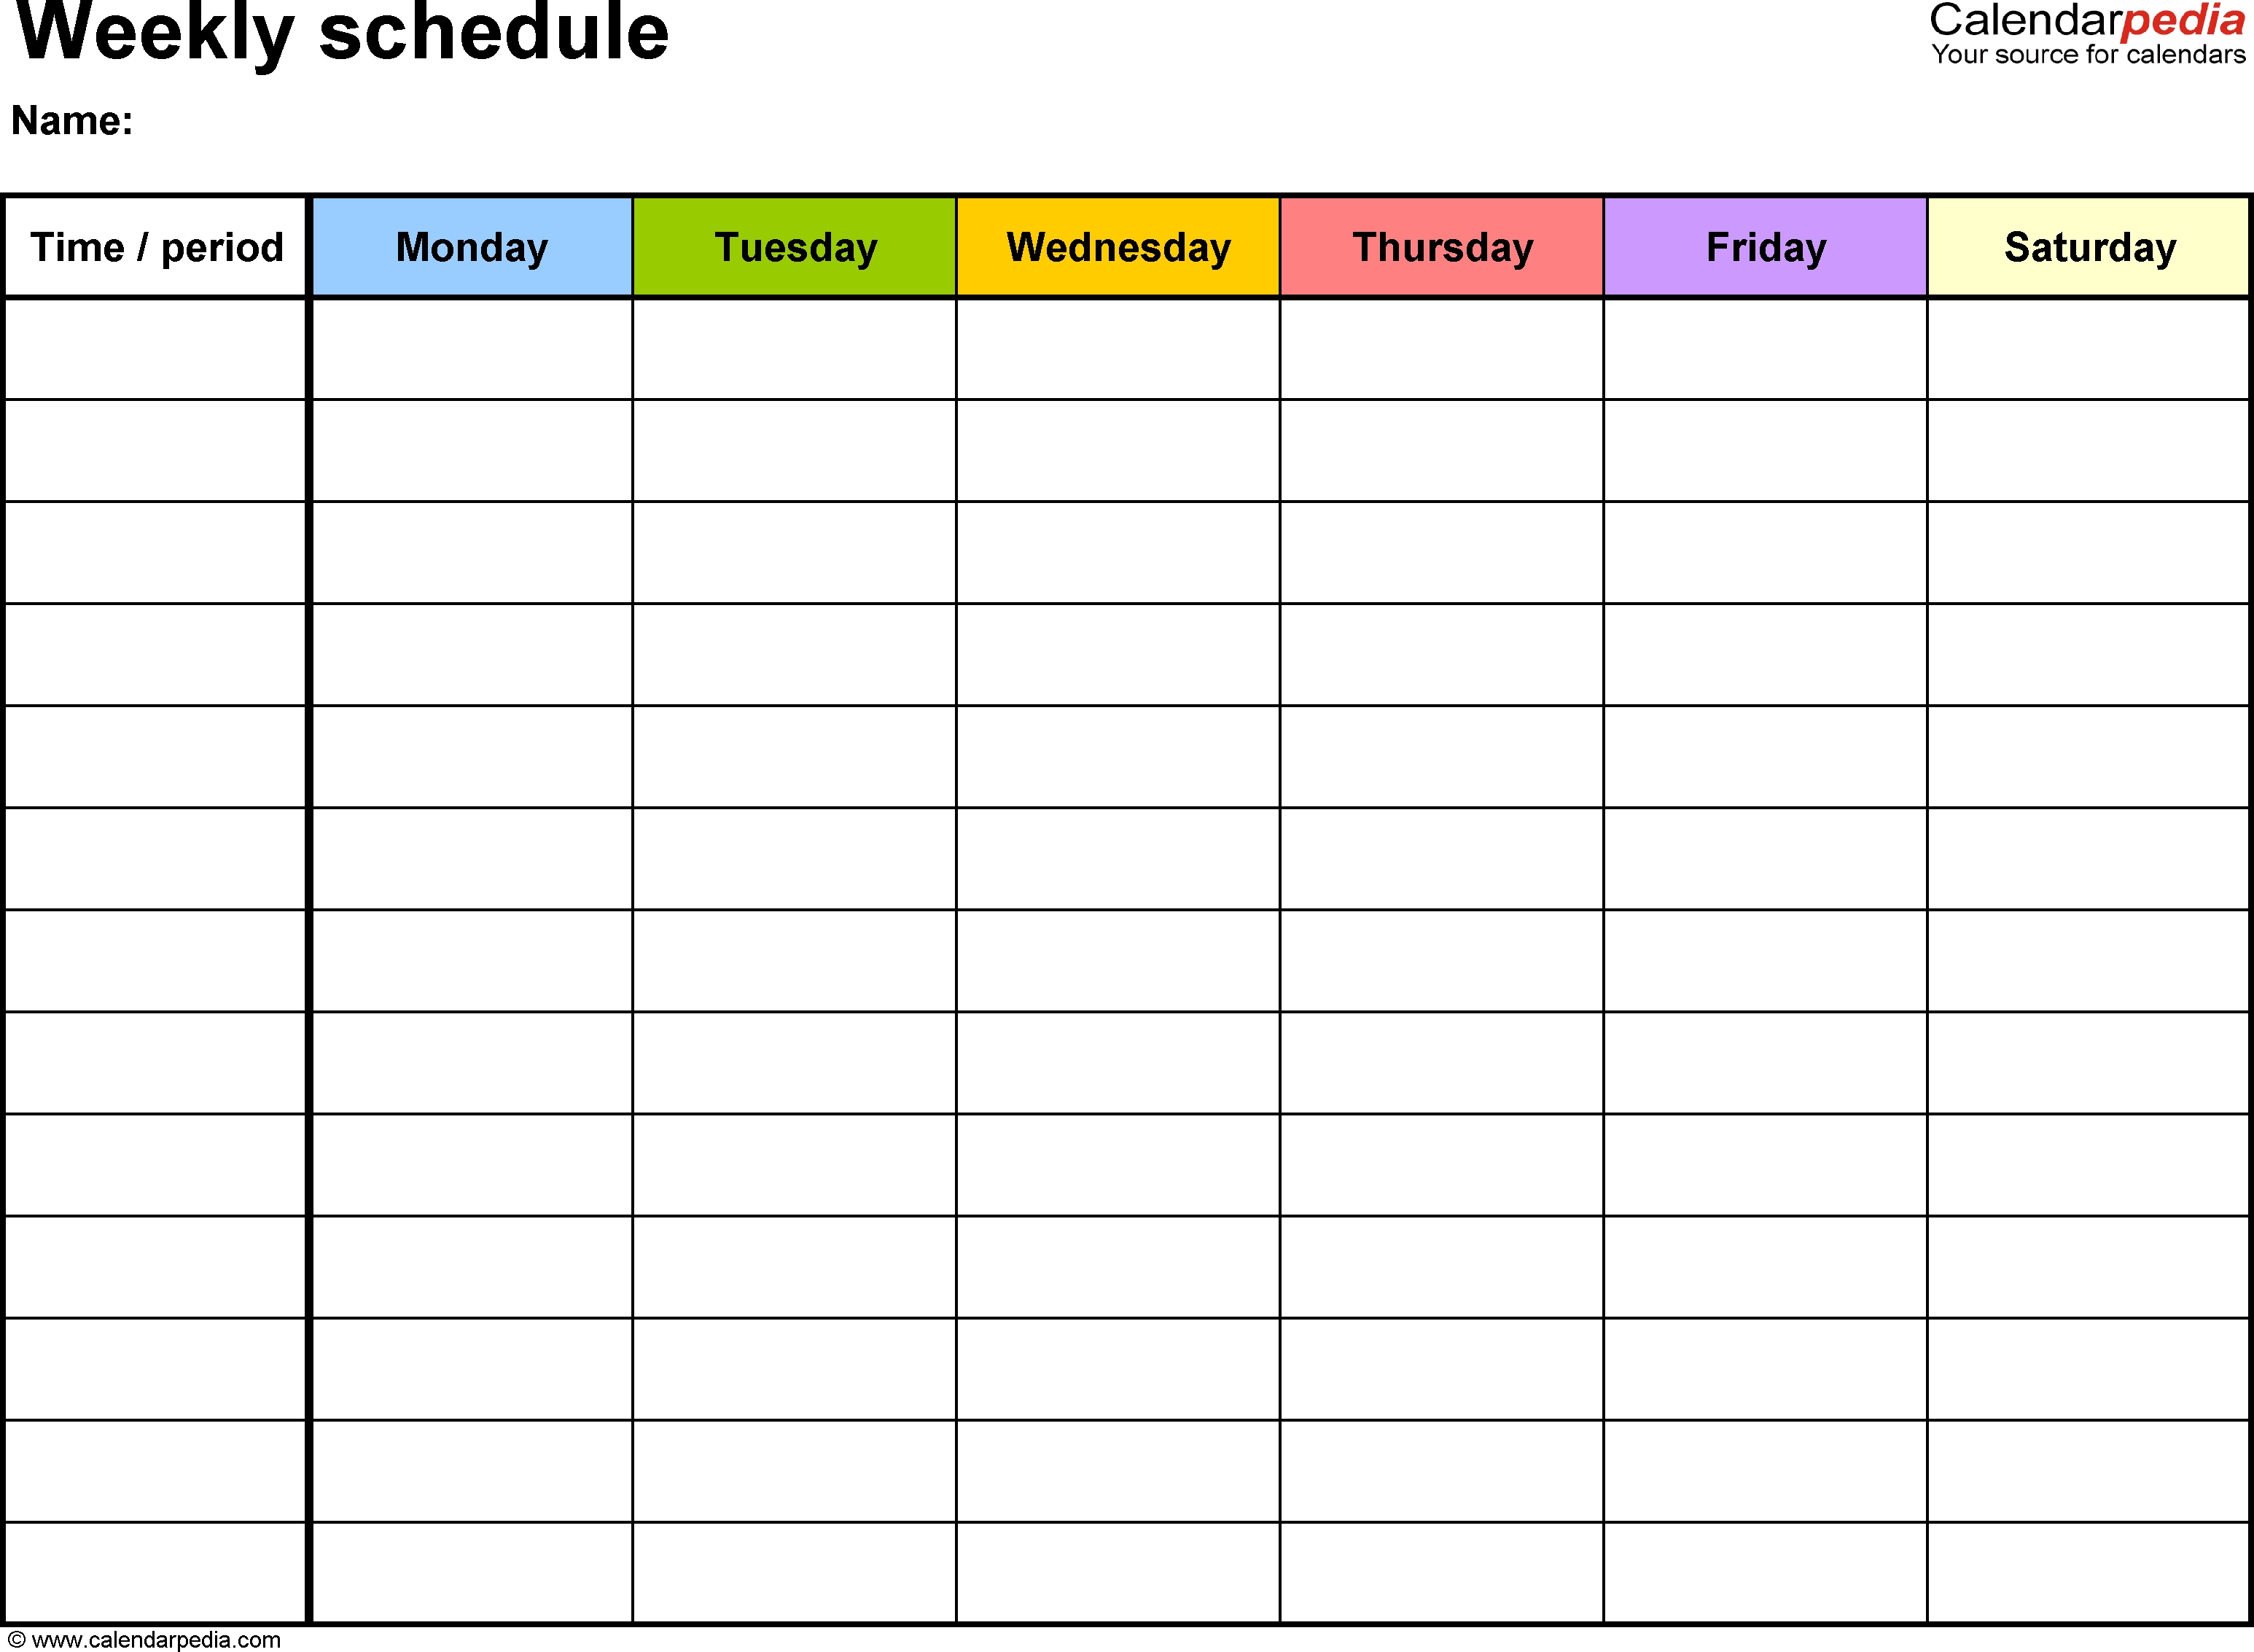 Weekly Calendar Word - Maco.palmex.co pertaining to Free Printable Daily Calendar With Time Slots